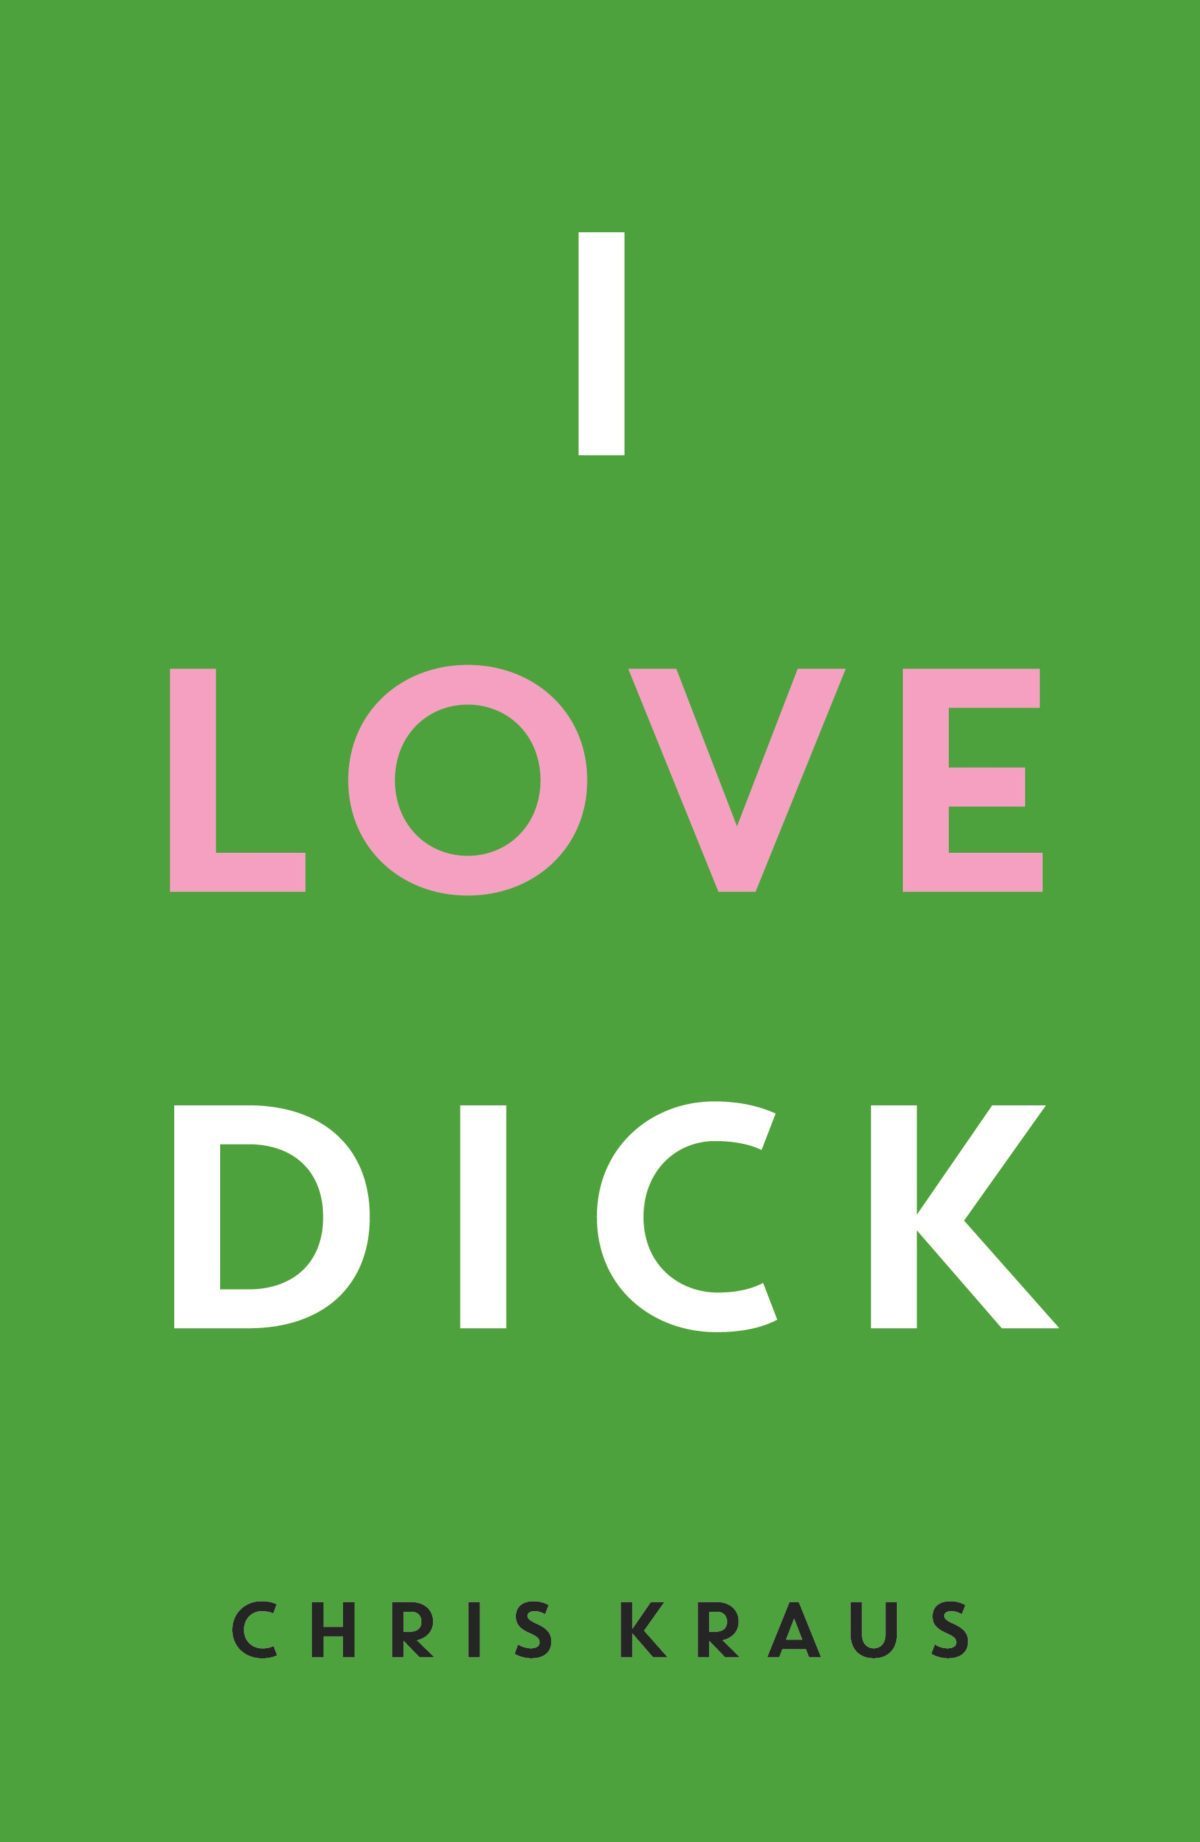 I Love Dick cover design by Peter Dyer